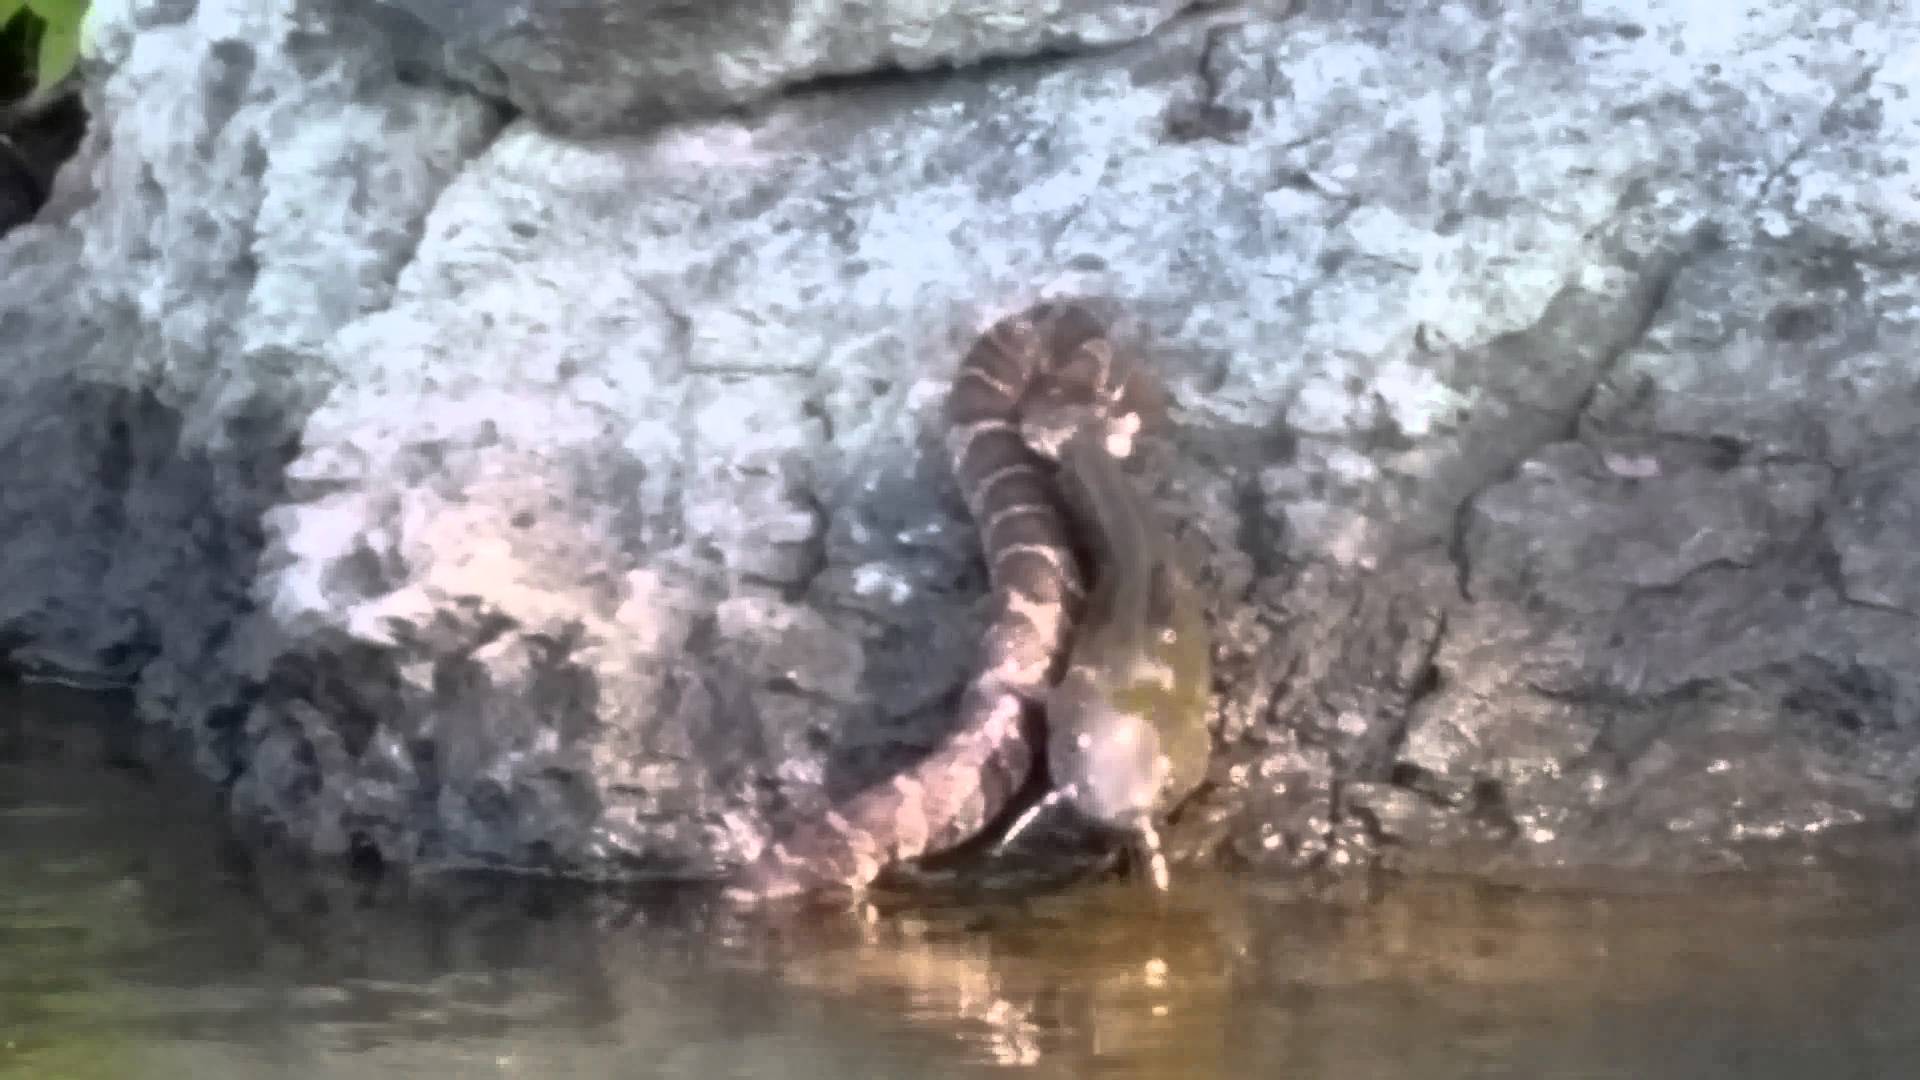 Snake drags catfish out of the water at Falls Lake, Snake drags catfish out of the water at Falls Lake video, This snake is filmed dragging a catfish out of the water at Falls Lake in Rolesville, North Carolina. Next time it's your turn, snake vy catfish video, snake catfish nc video, snake catfish video